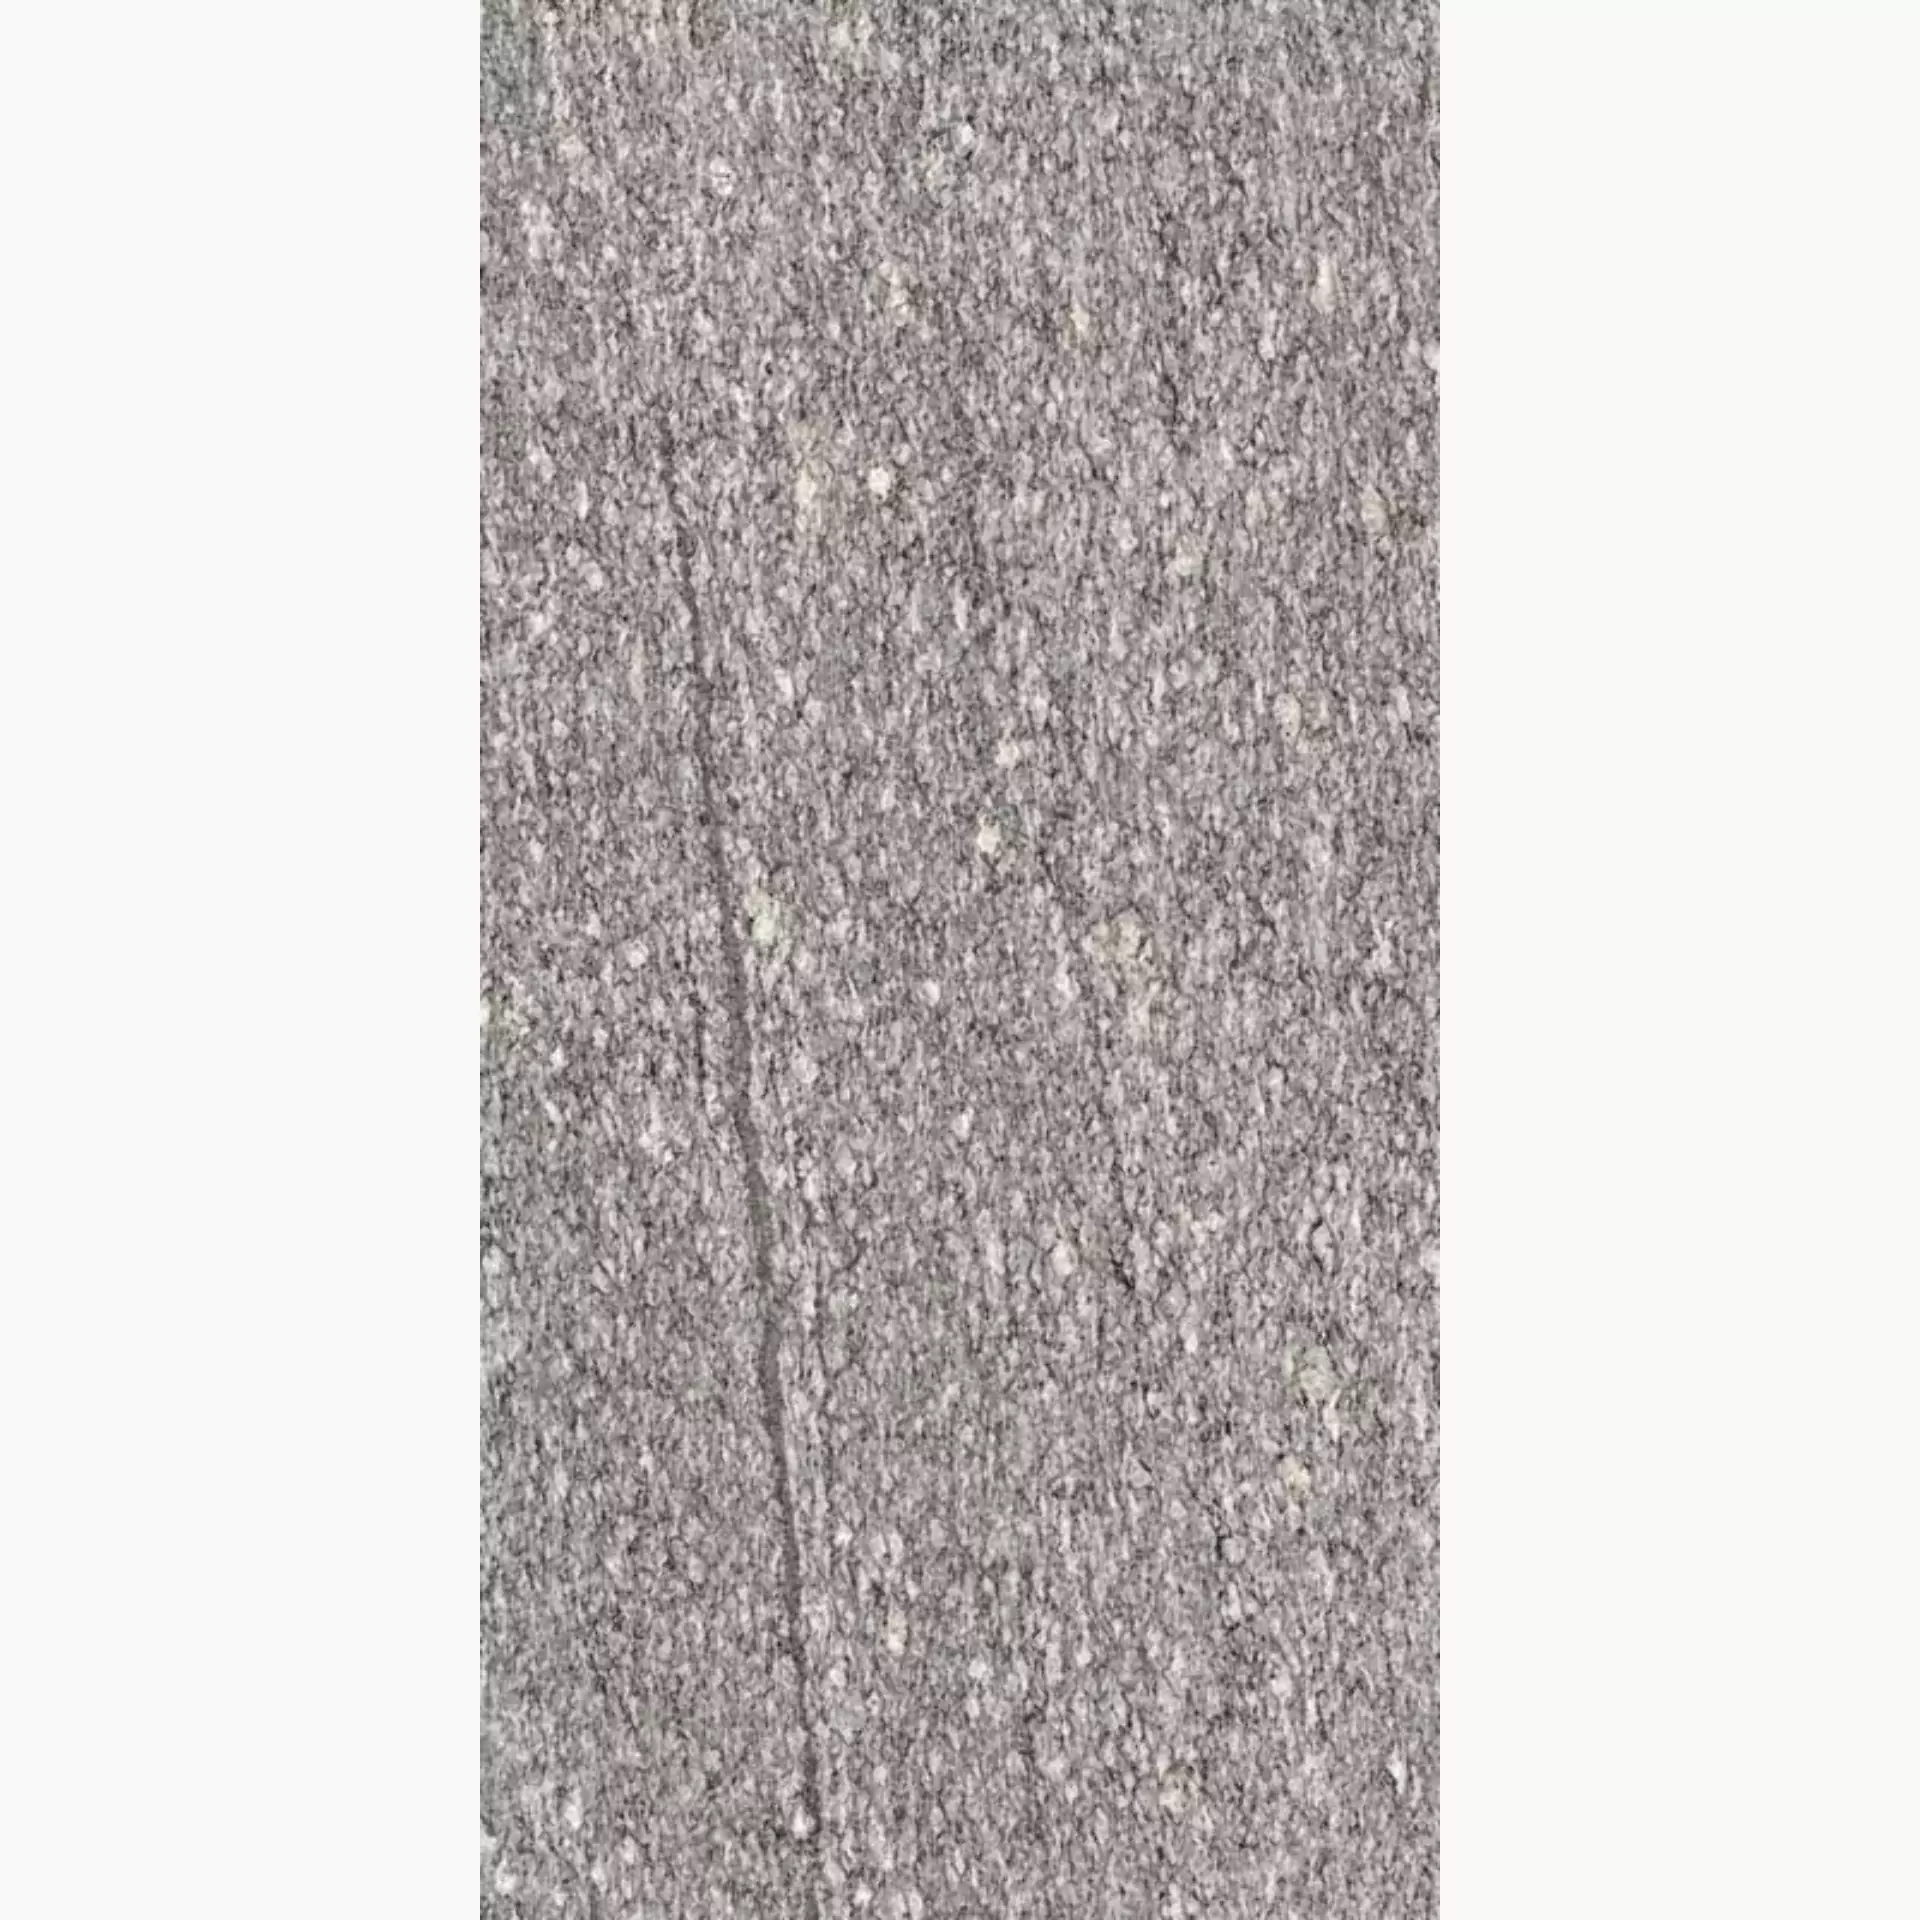 Sant Agostino Unionstone London Grey Natural CSALOGRY30 30x60cm rectified 10mm